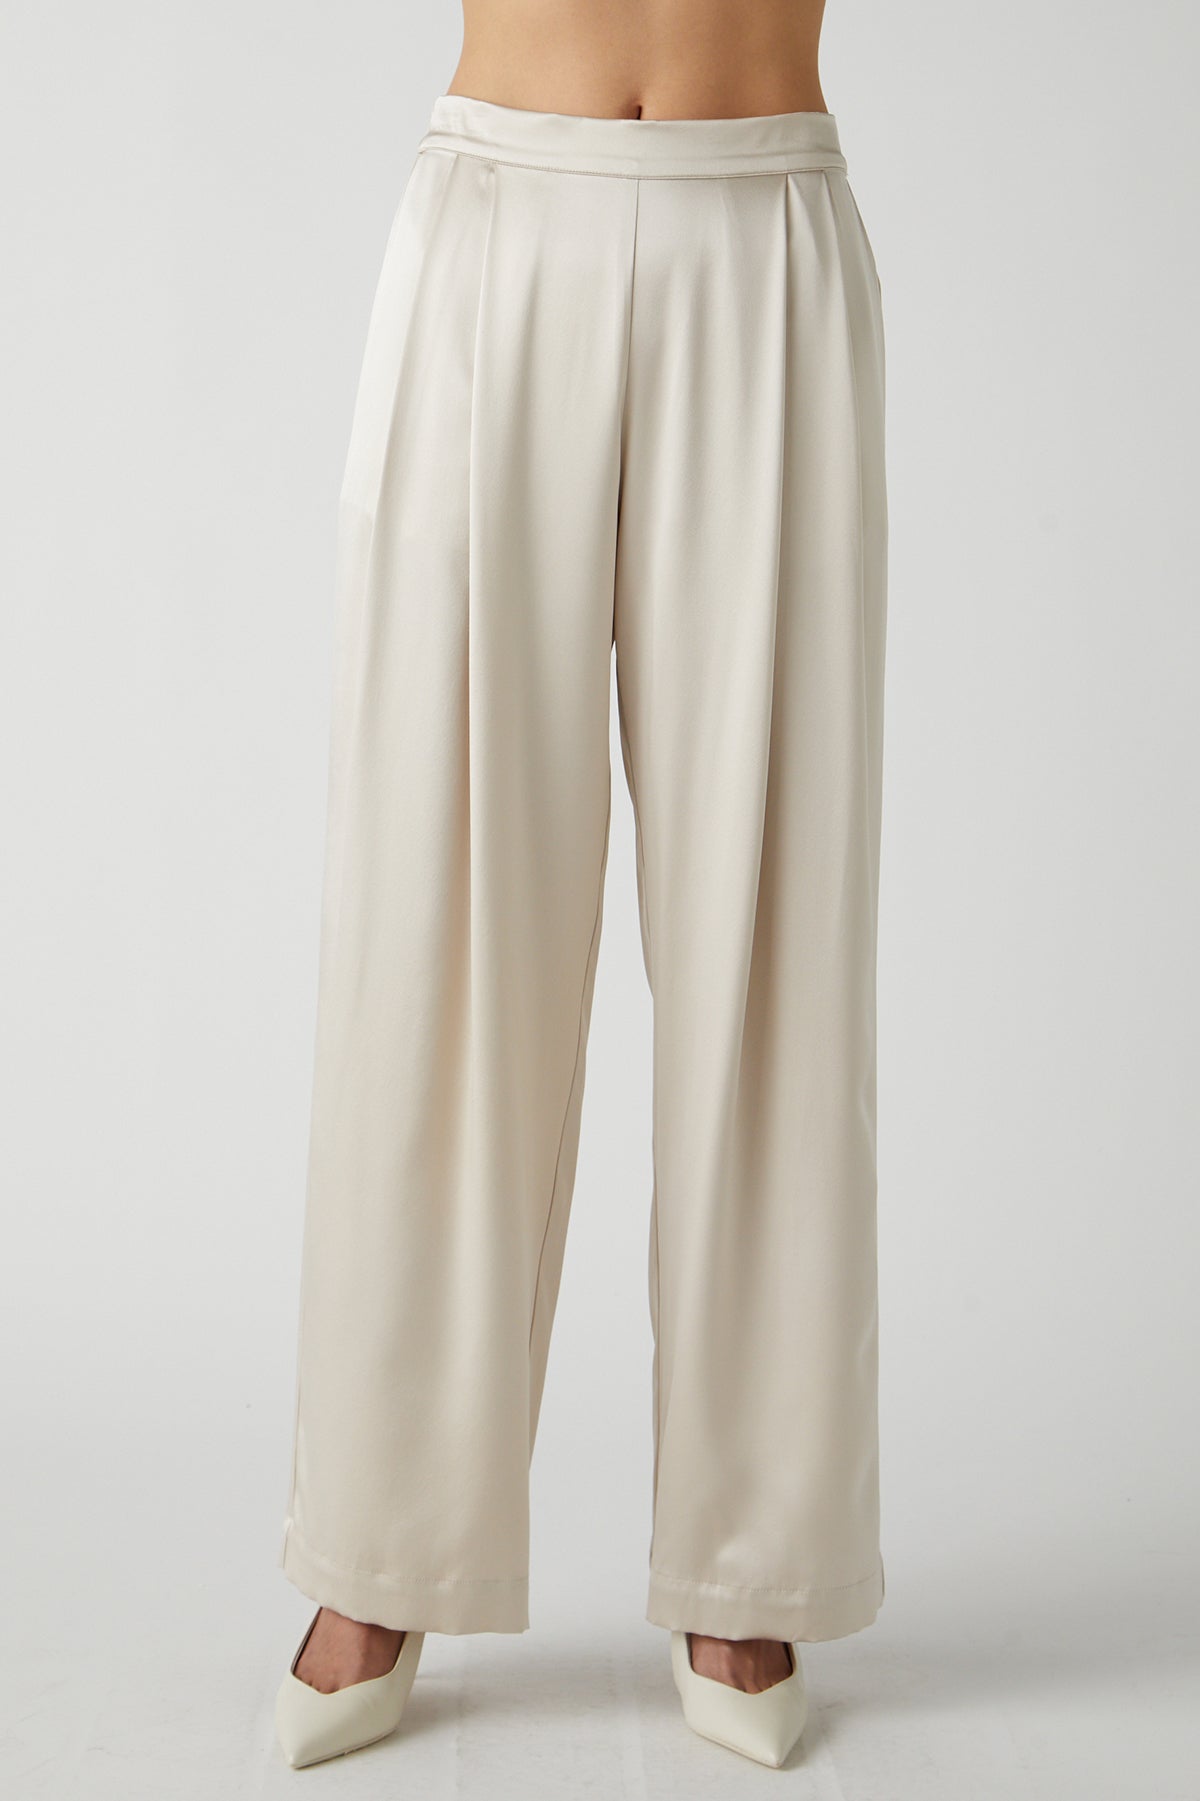 The model is wearing a white Manhattan pant by Velvet by Jenny Graham.-25483418796225